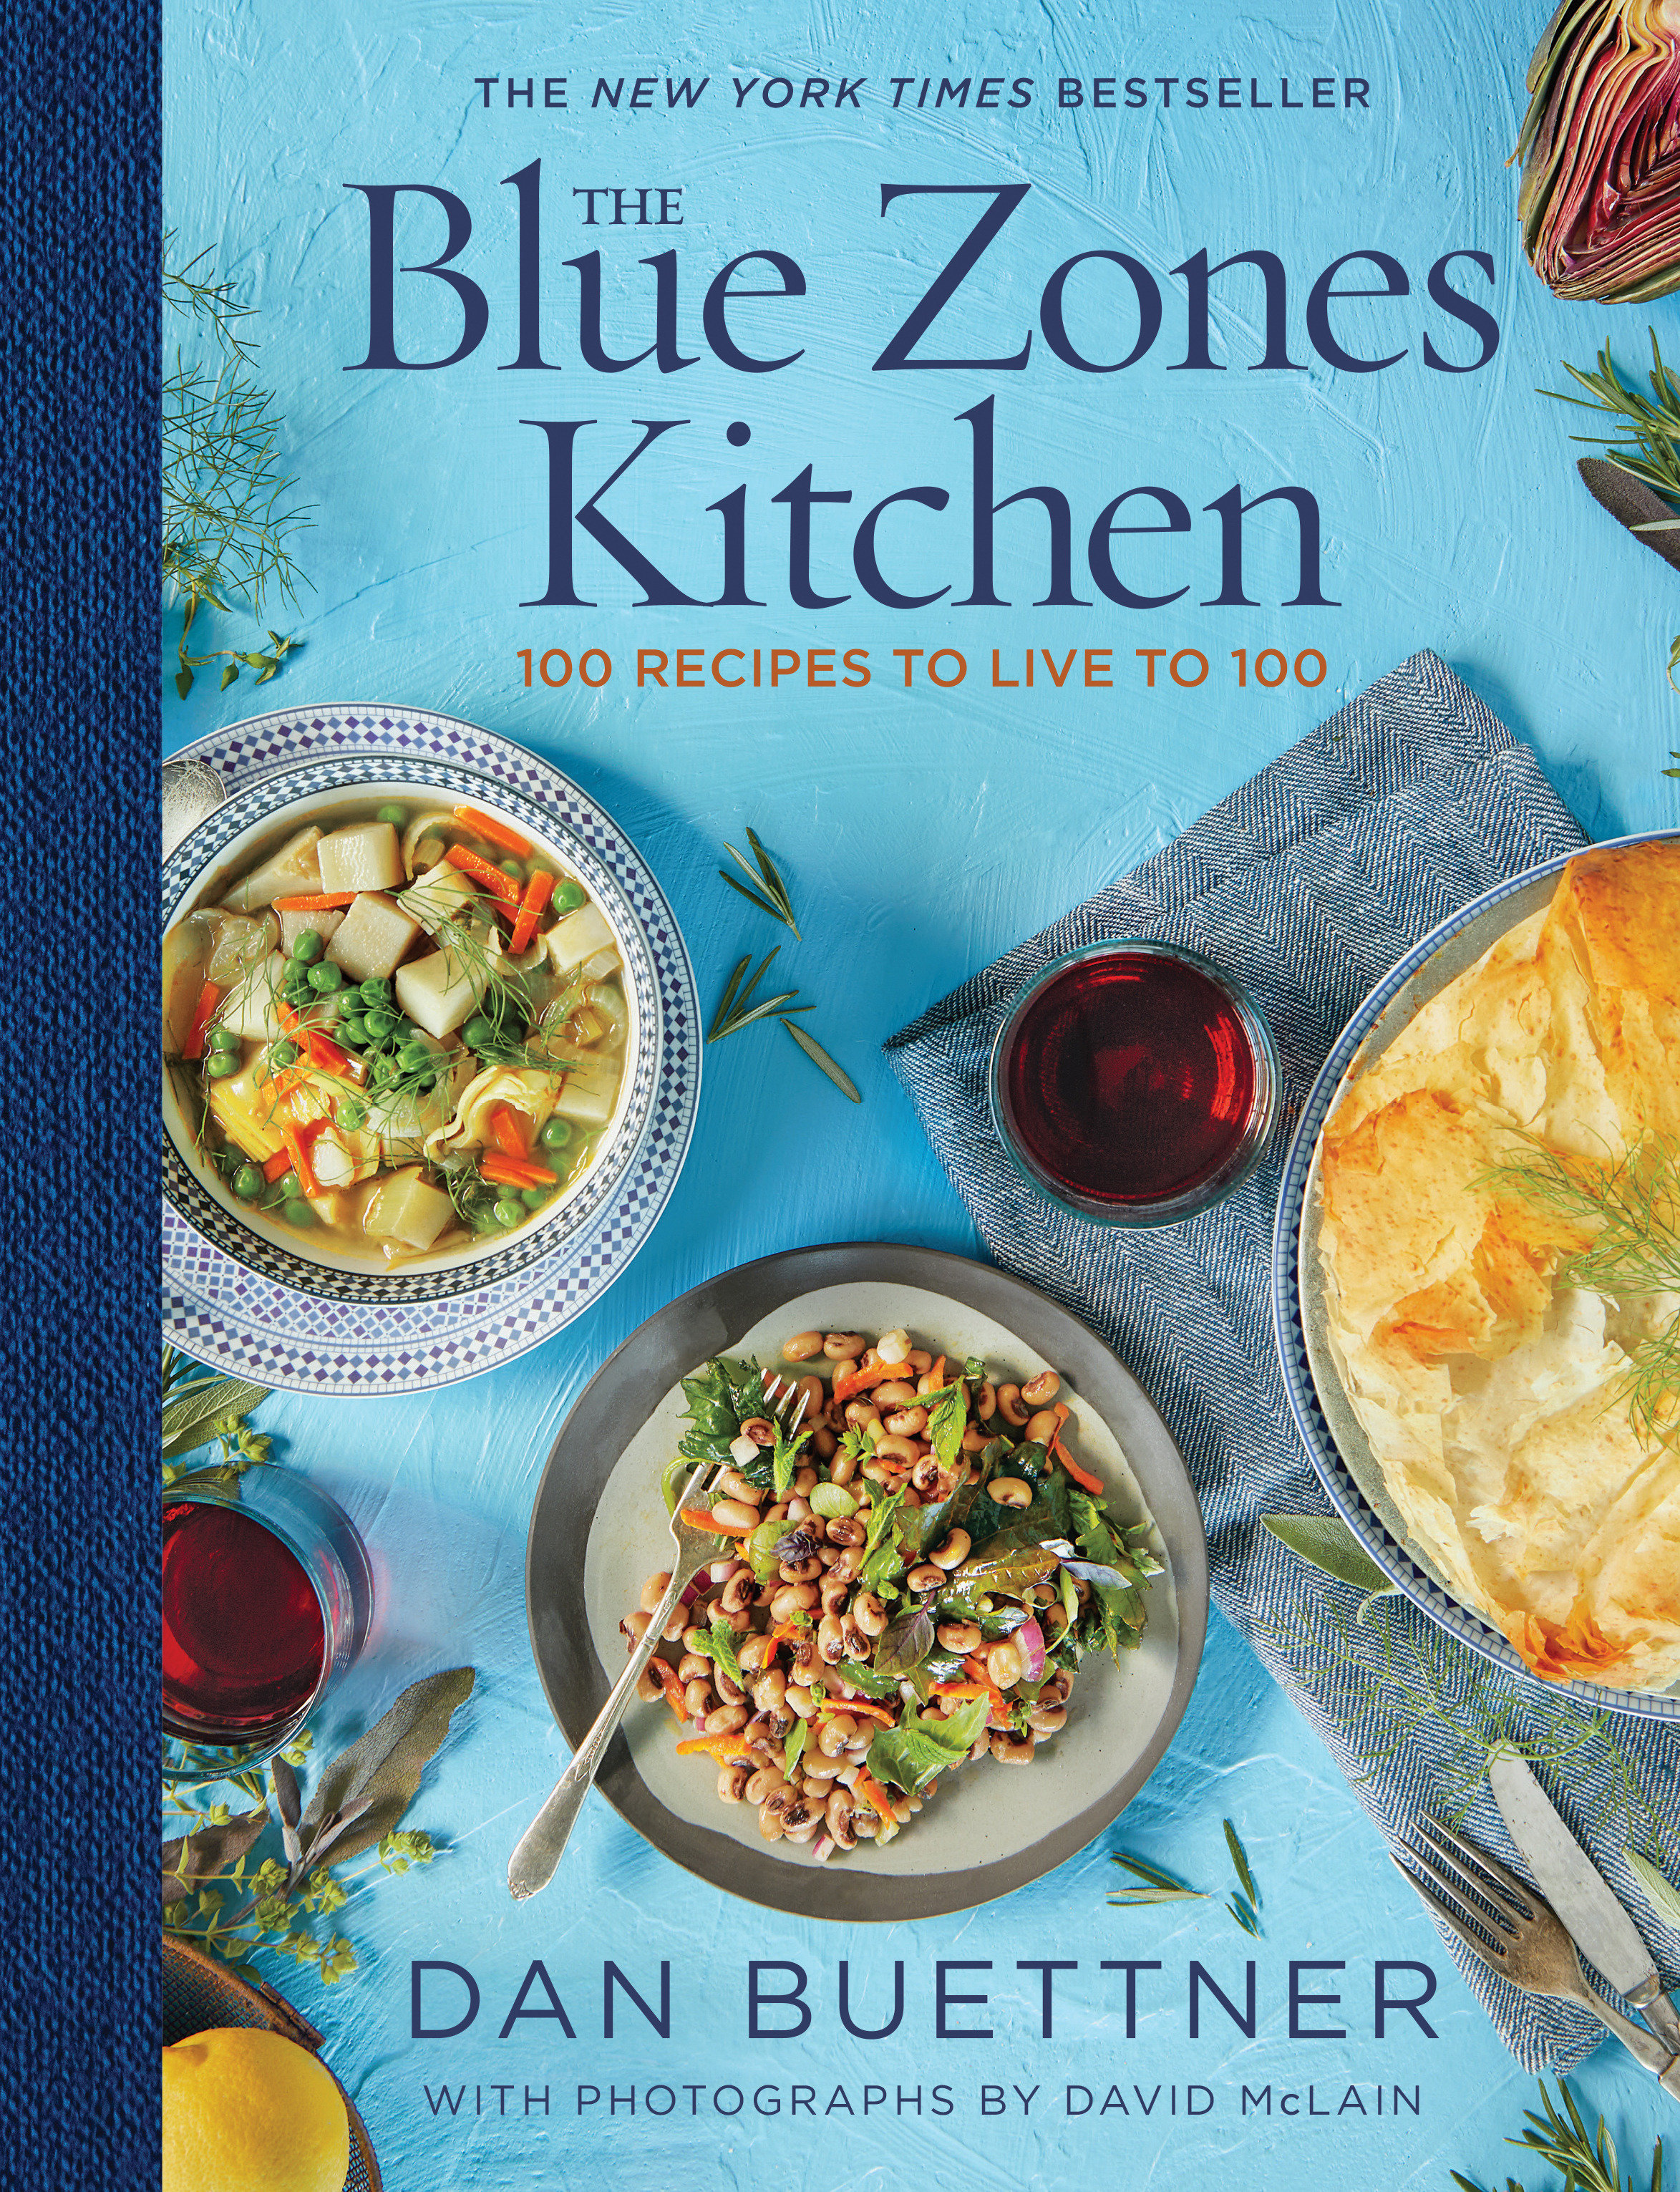 The Blue Zones Kitchen (Hardcover Book)